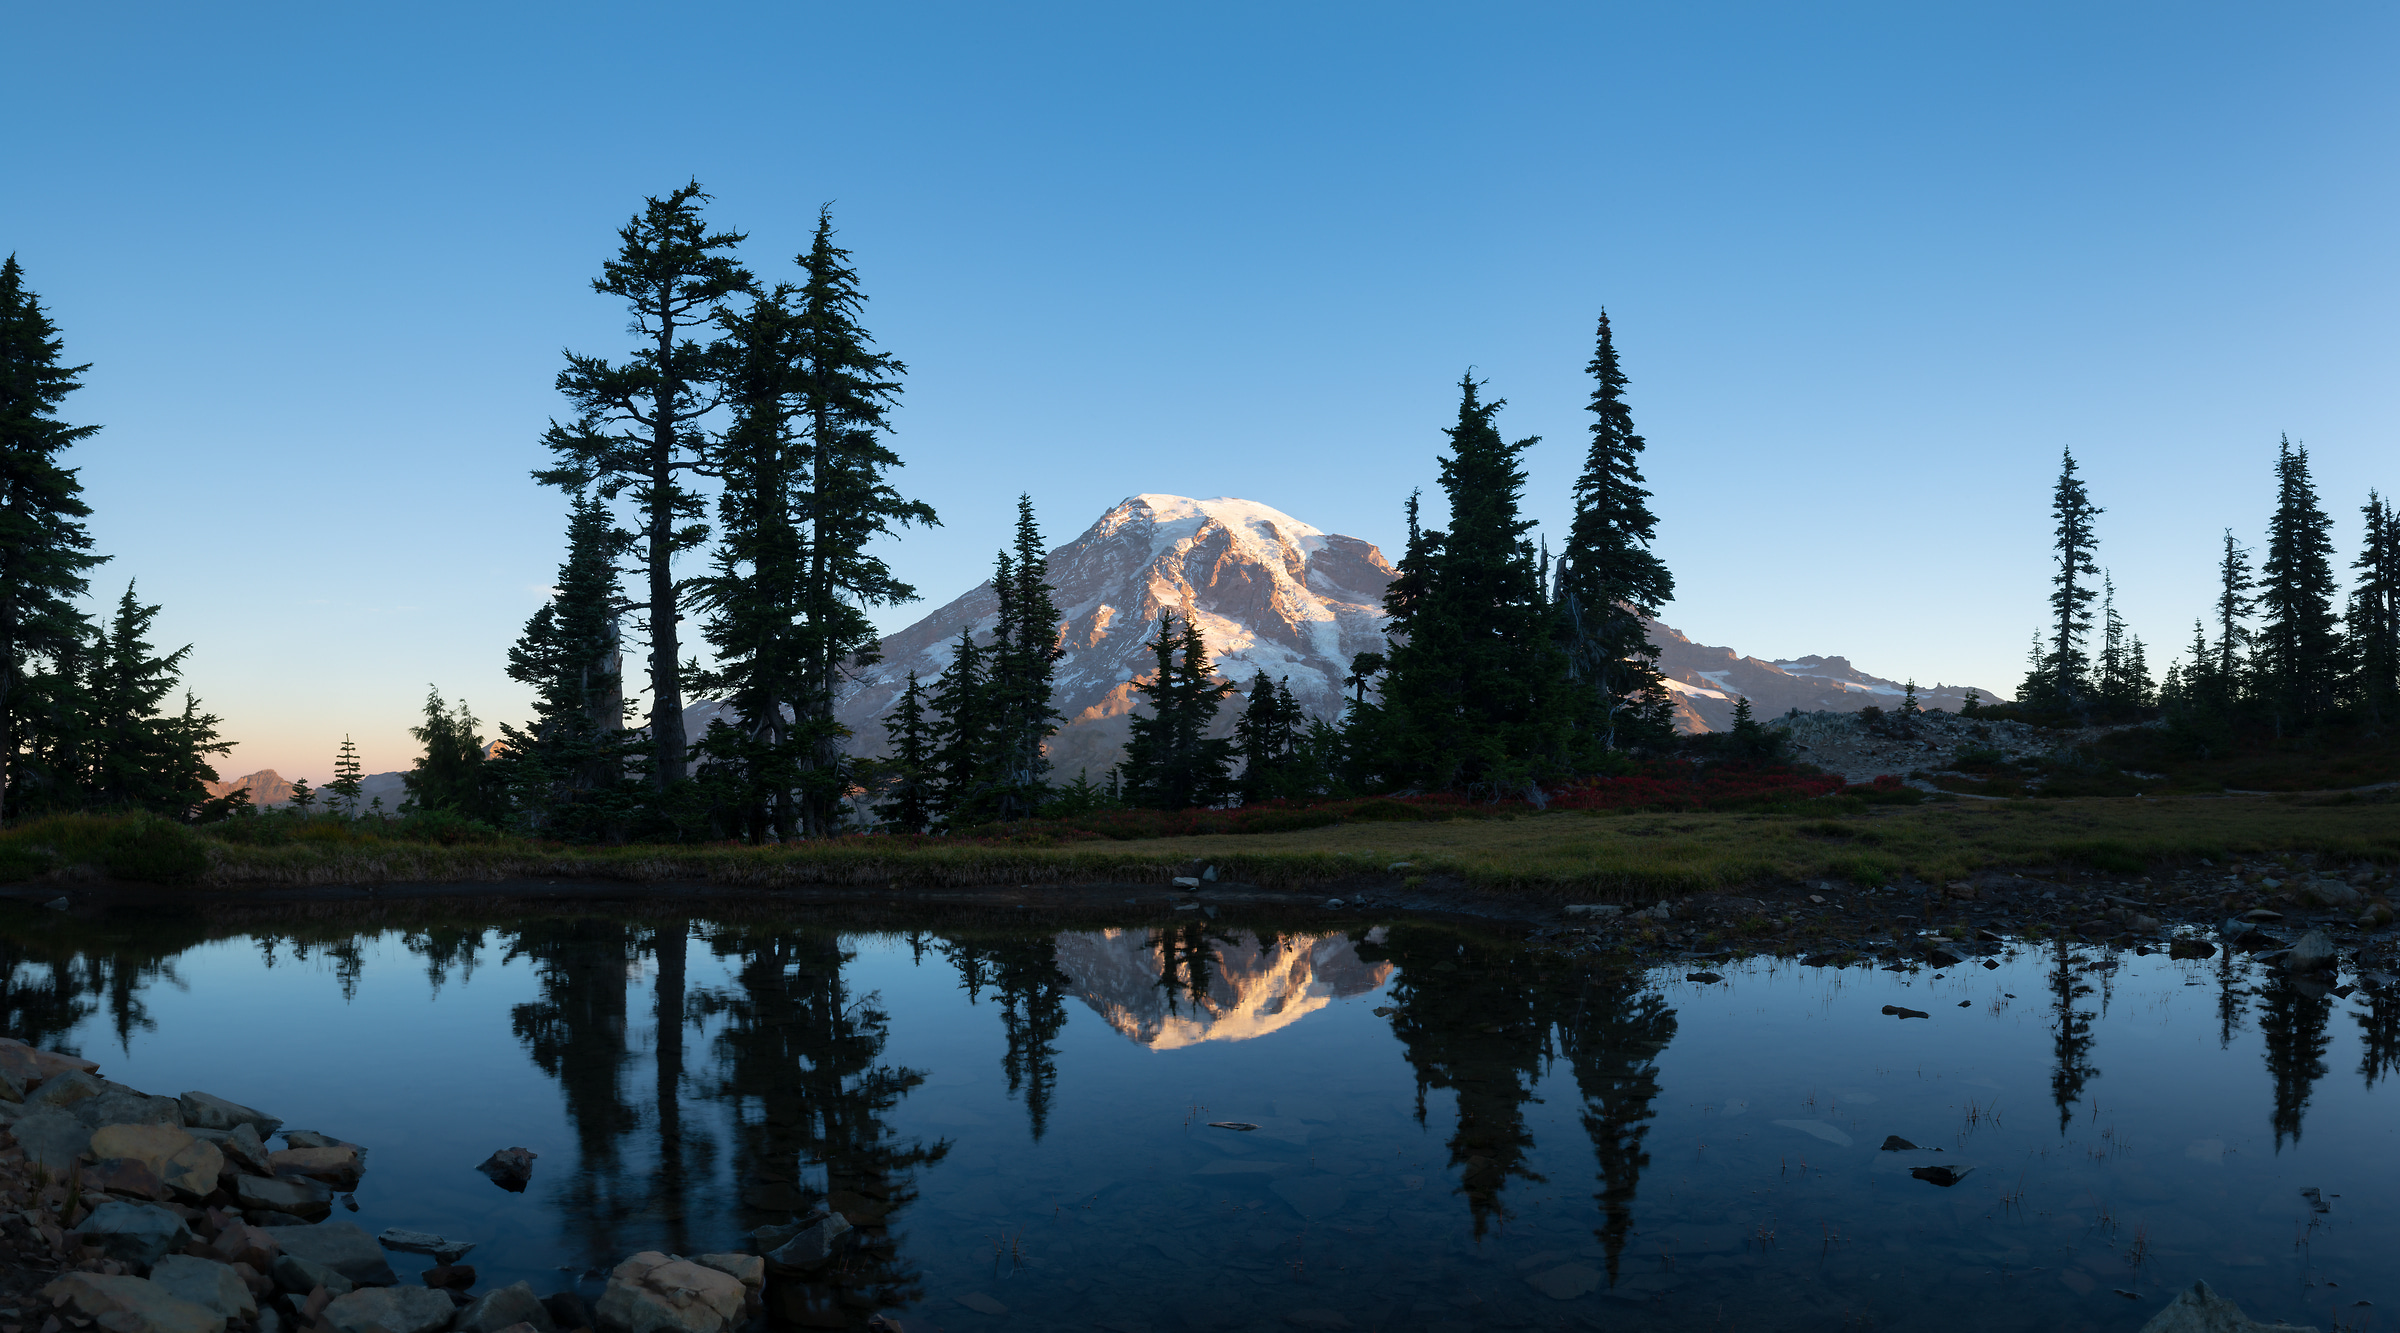 171 megapixels! A very high resolution, large-format VAST photo print of Mt. Rainier and a lake; landscape photograph created by Greg Probst in Mt. Rainier National Park, Washington